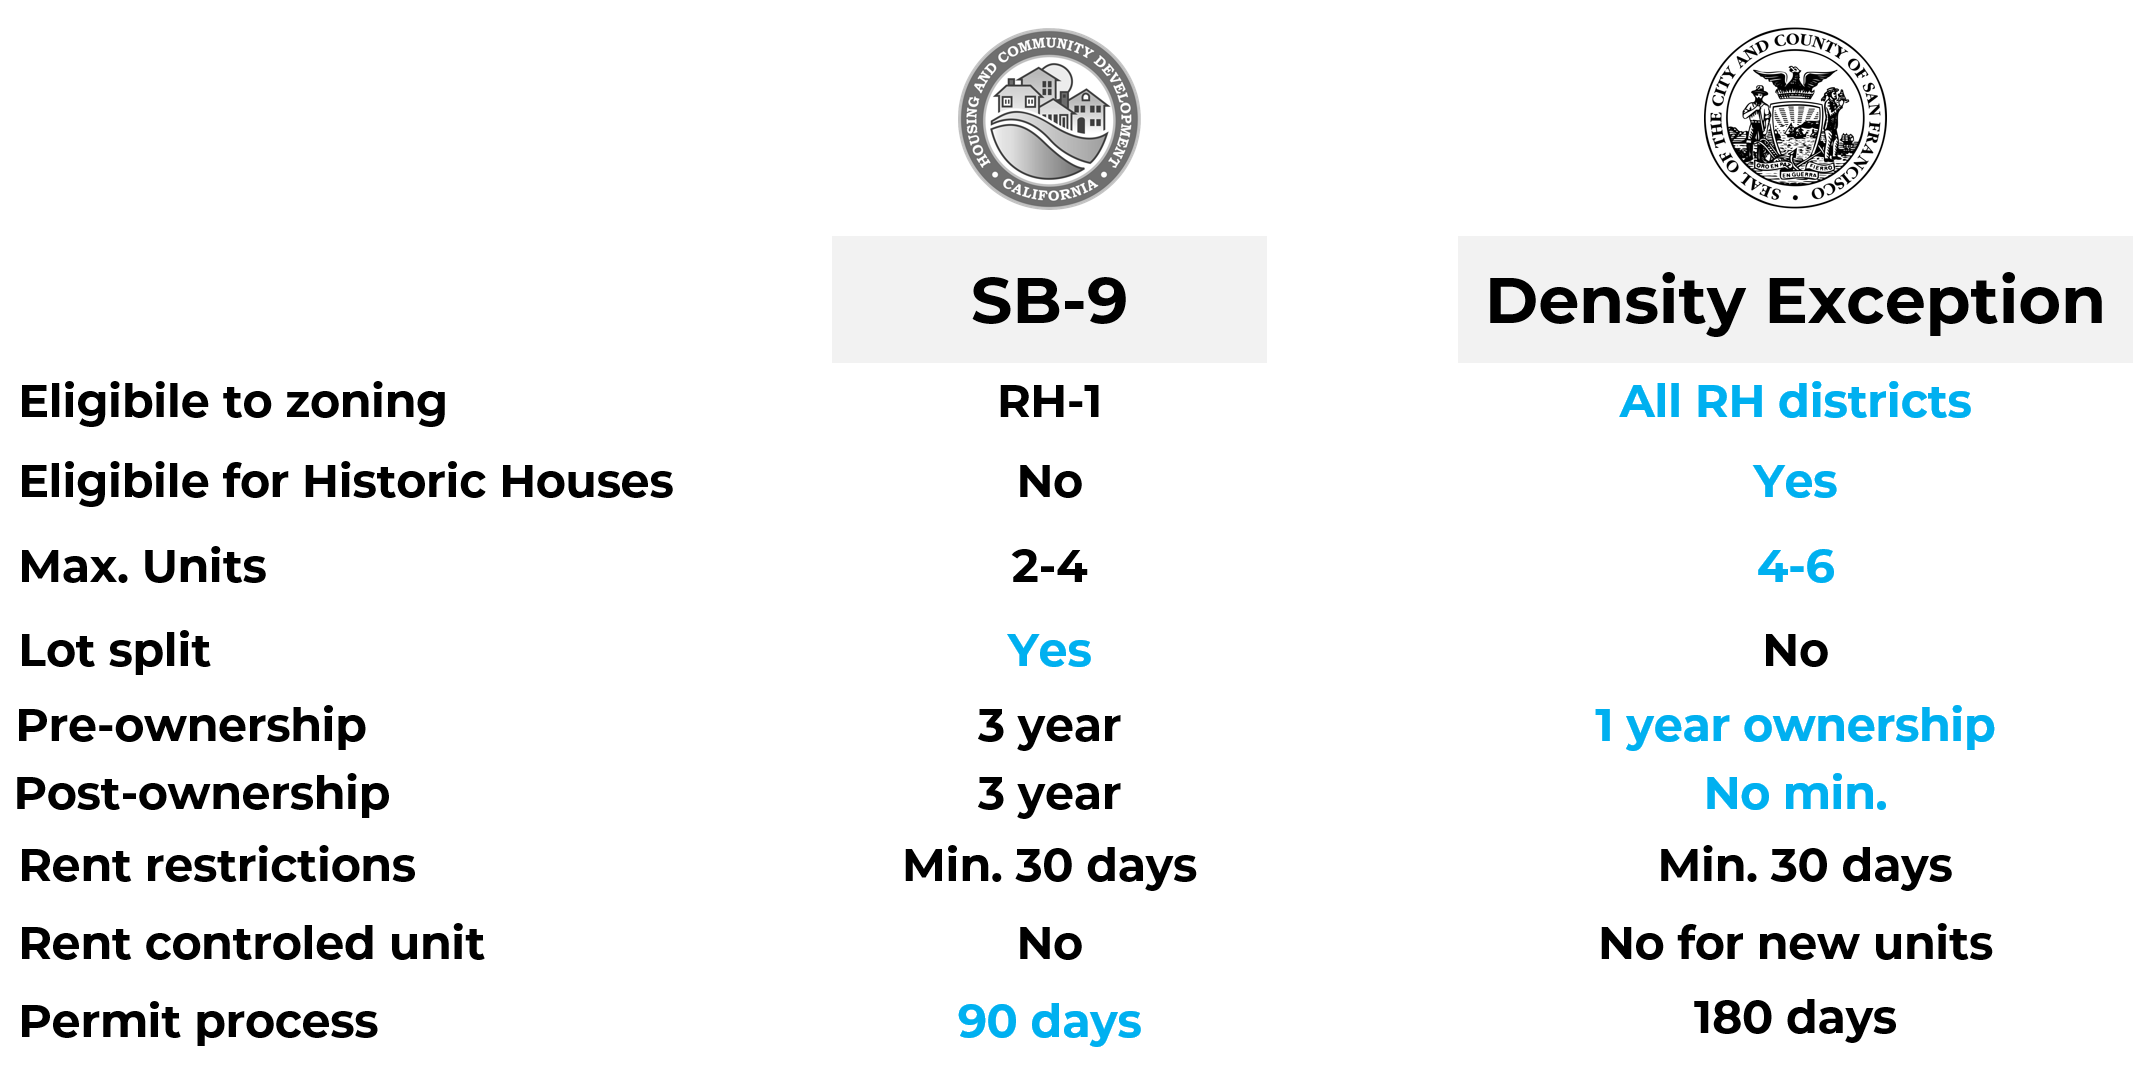 SB-9 vs. Density Exception for Residential Districts in San Francisco